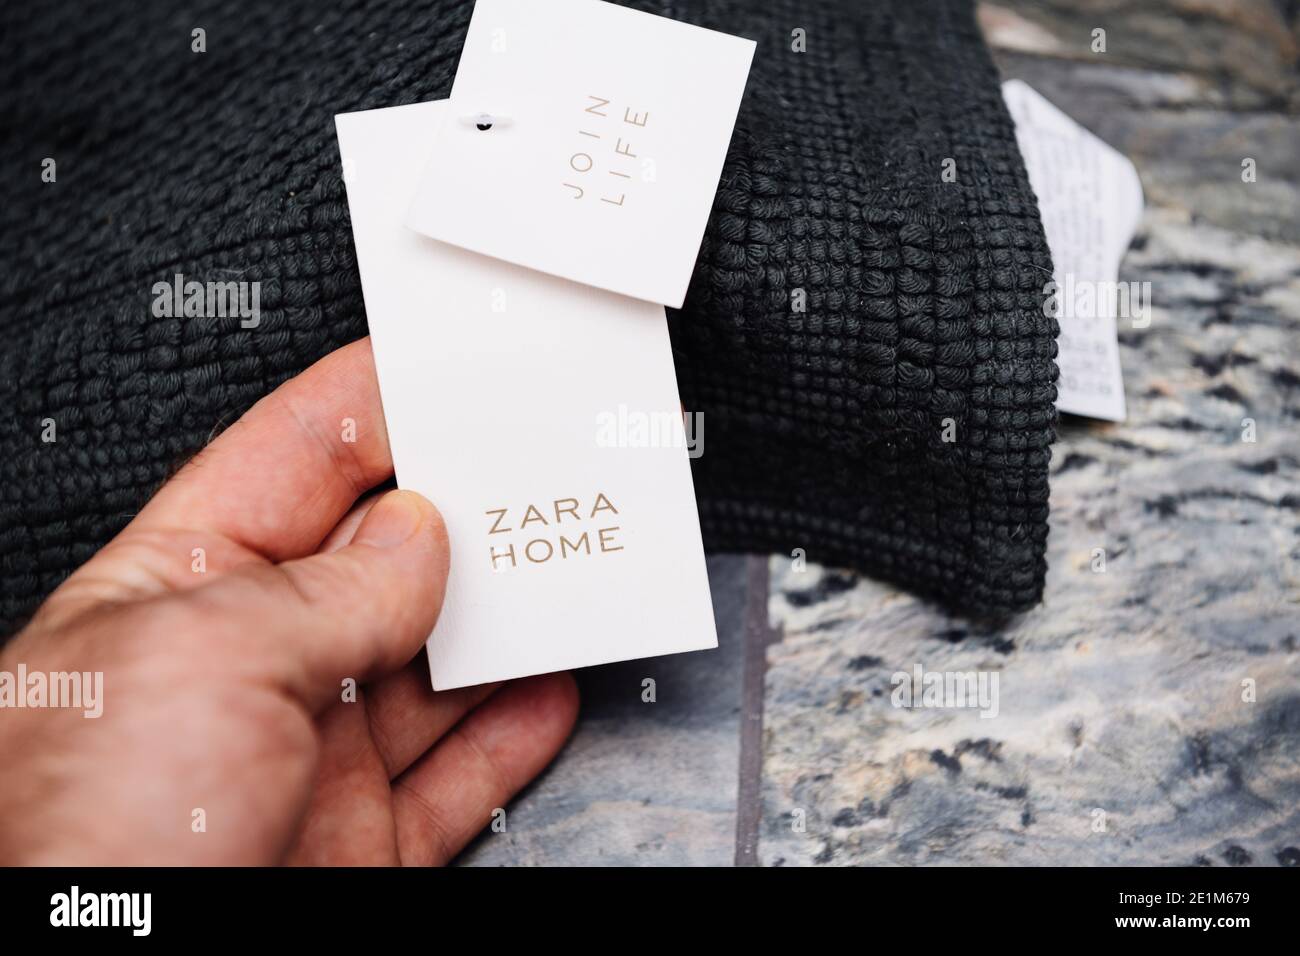 Paris, France - Dec 30, 2020: New luxury bathroom with male hand holding  the Zara Home floor textile rug on the luxury stone natural background  Stock Photo - Alamy